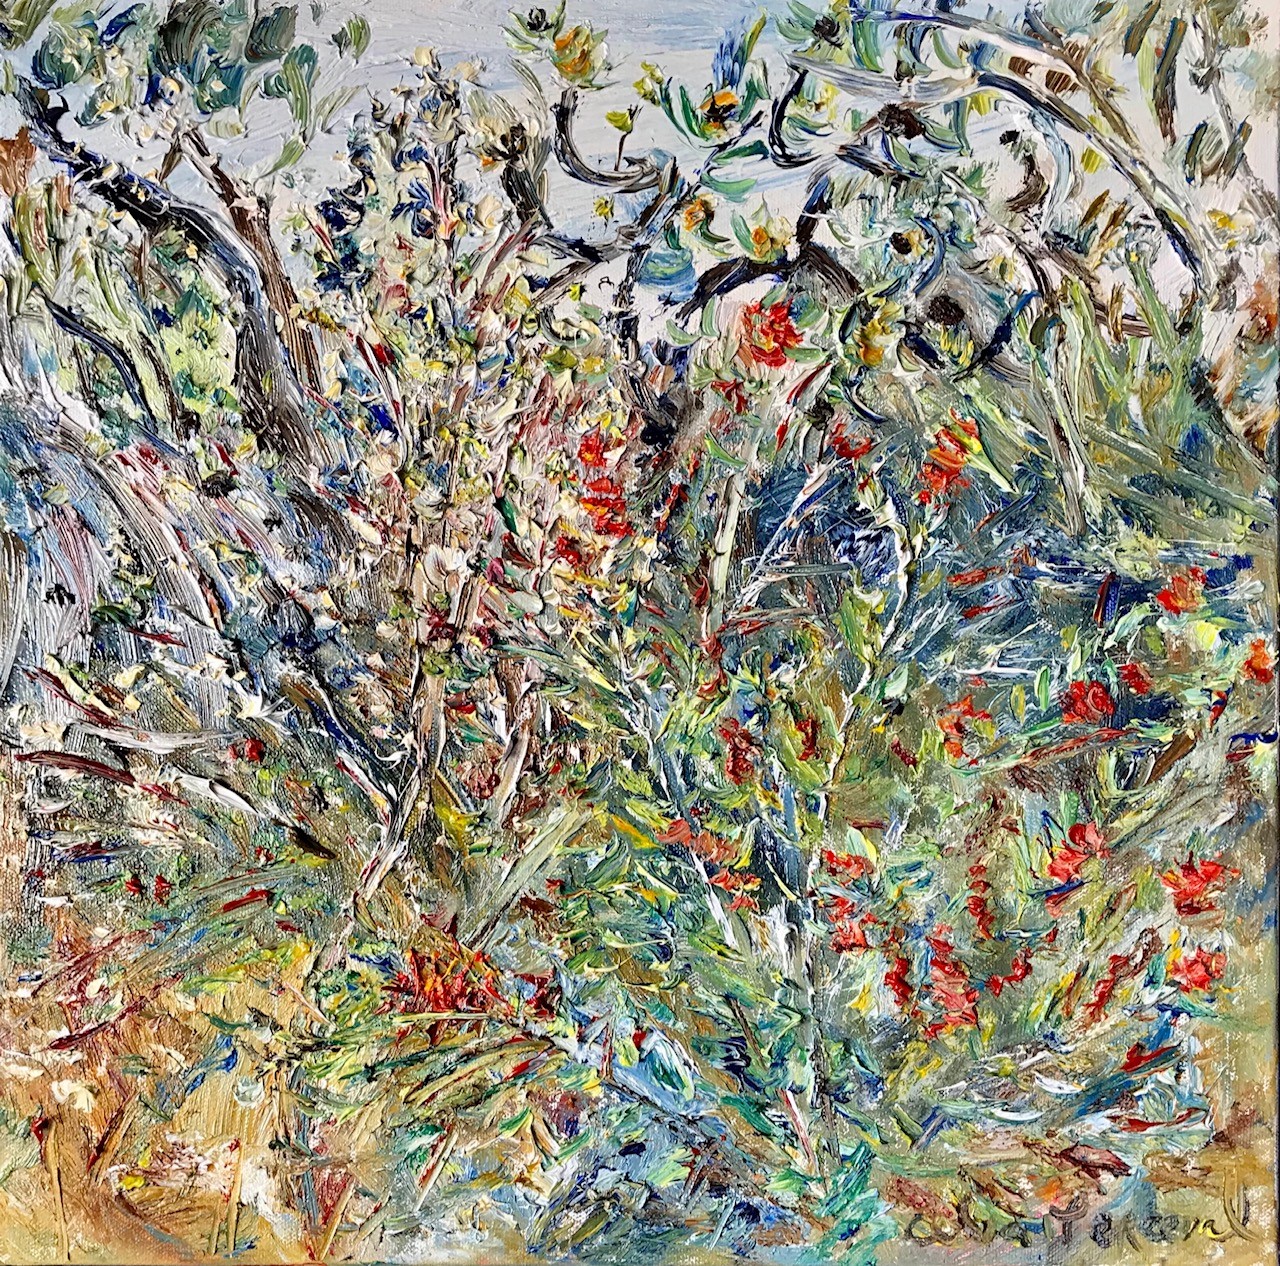 Perceval_Bottlebrush and Banksia in the Wildflowers NSW Coastal Bushland_oil on canvas 40 x40cm